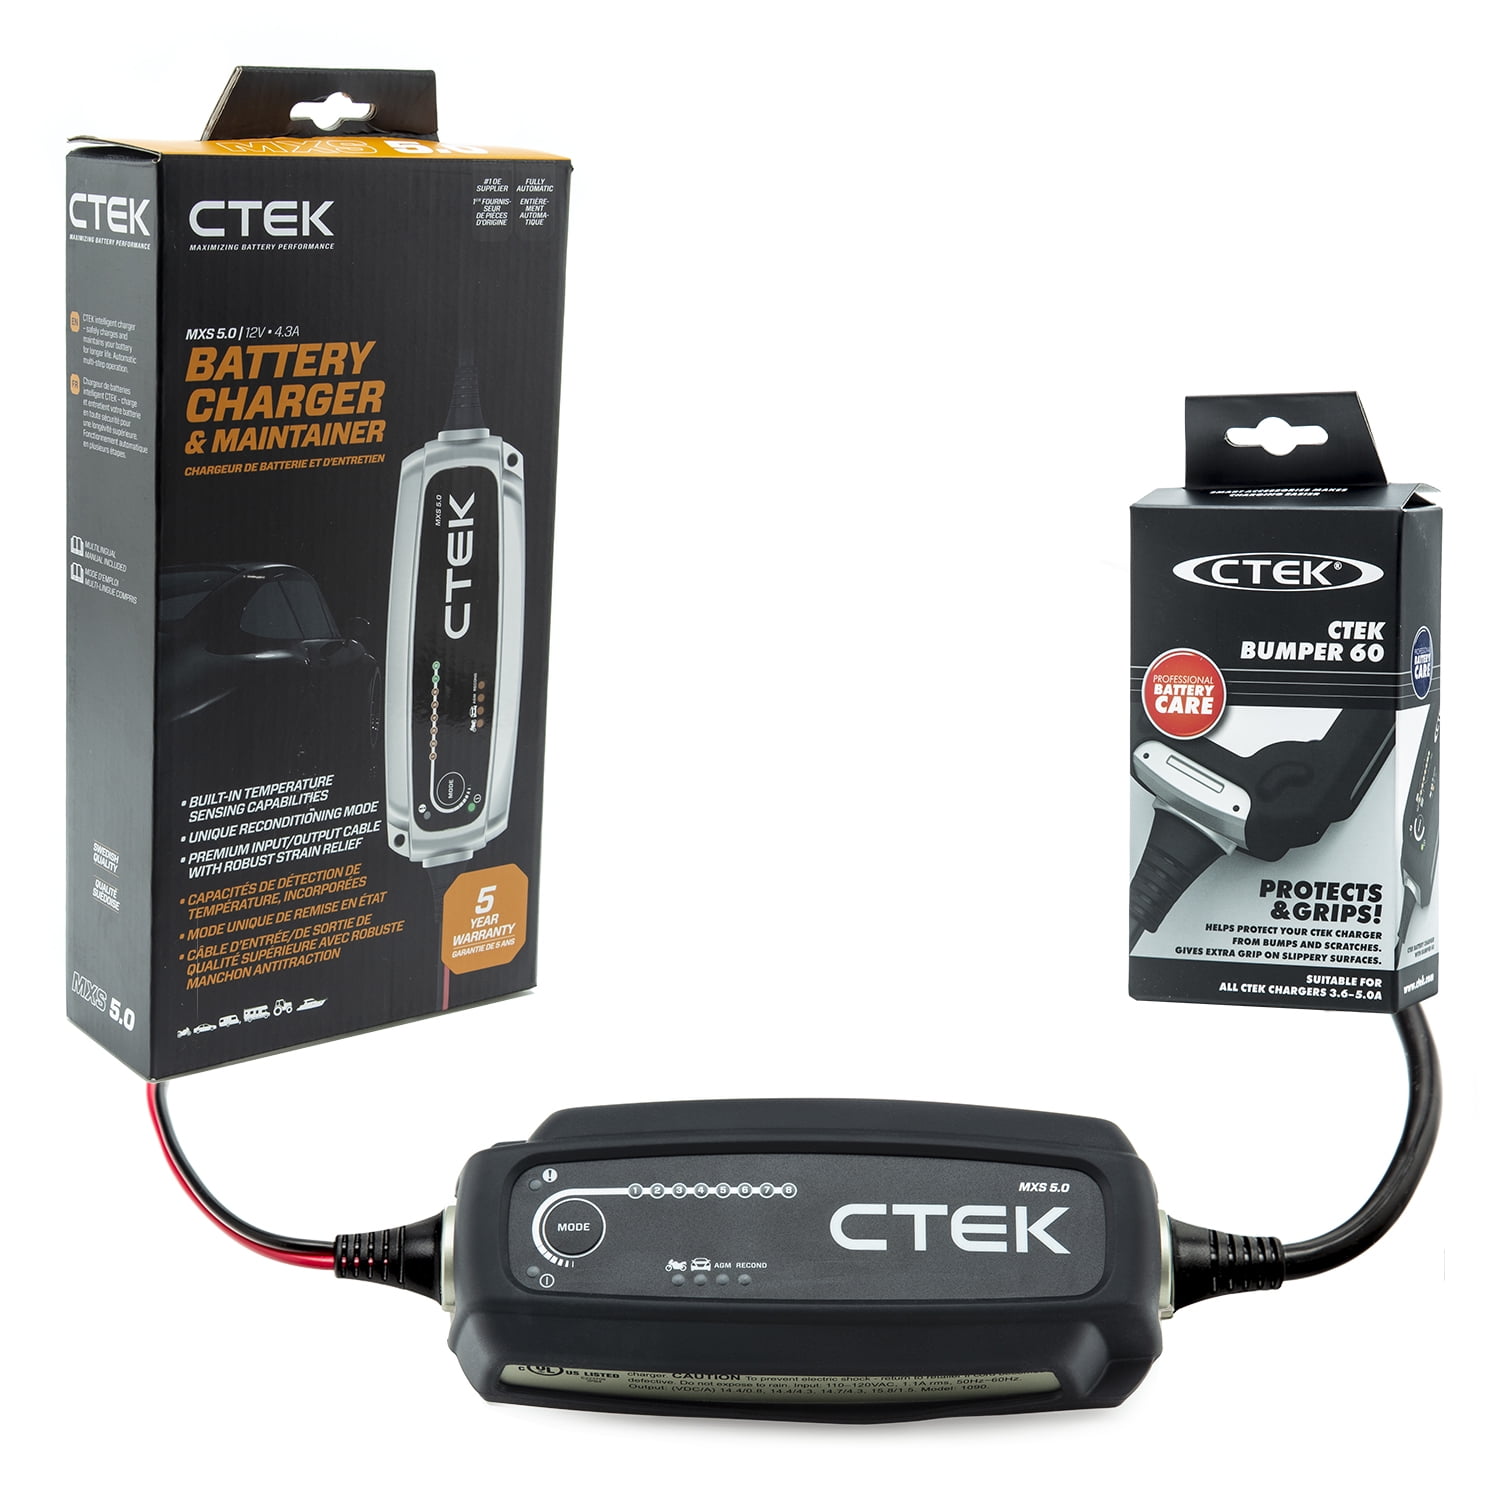 CTEK 40-206 MXS 5.0-12 Volt Battery Charger and Maintainer with 56-915  Black Bumper Accessory 